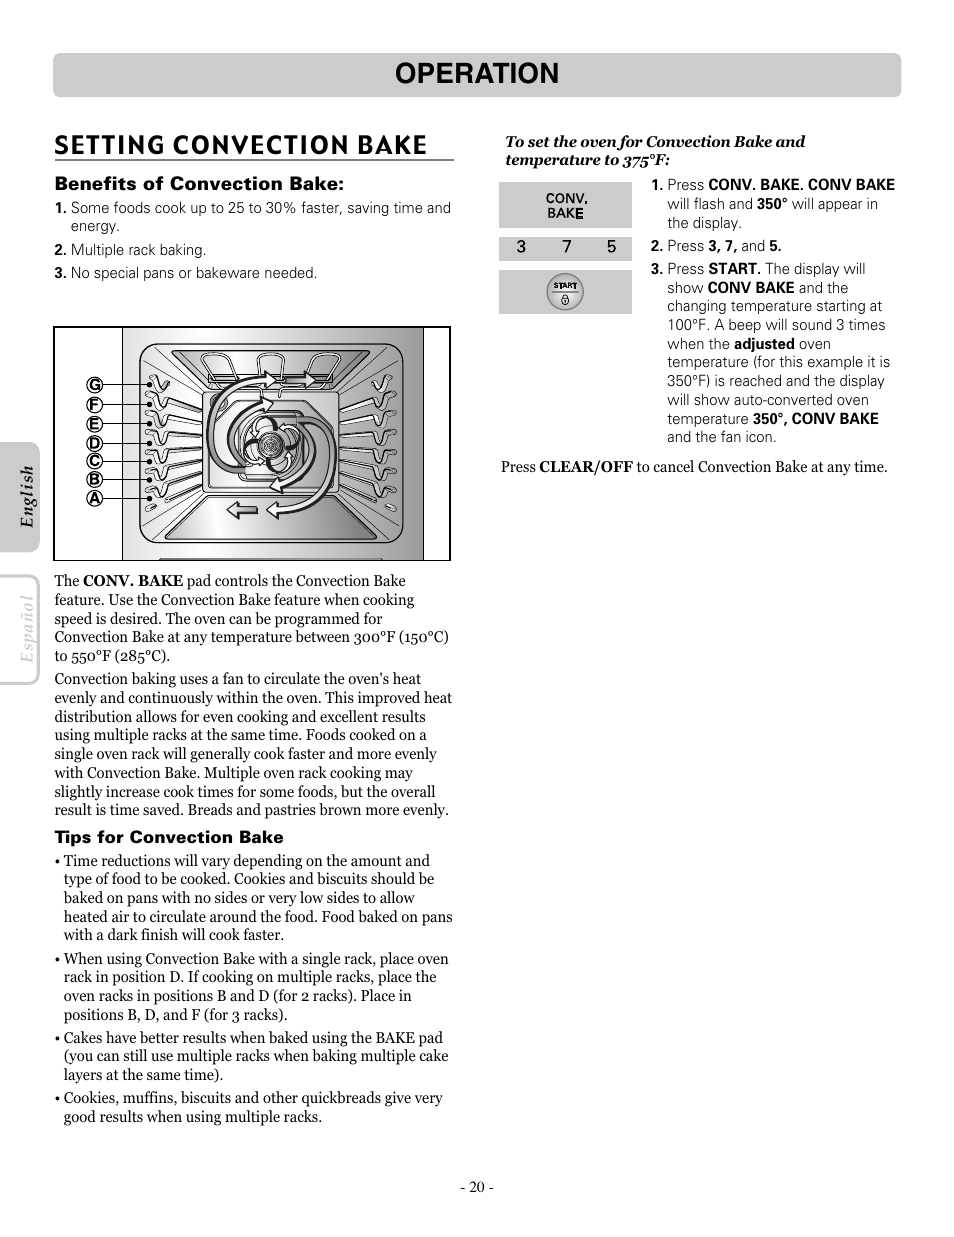 Operation, Setting convection bake | LG LRE30451ST User Manual | Page 20 / 34